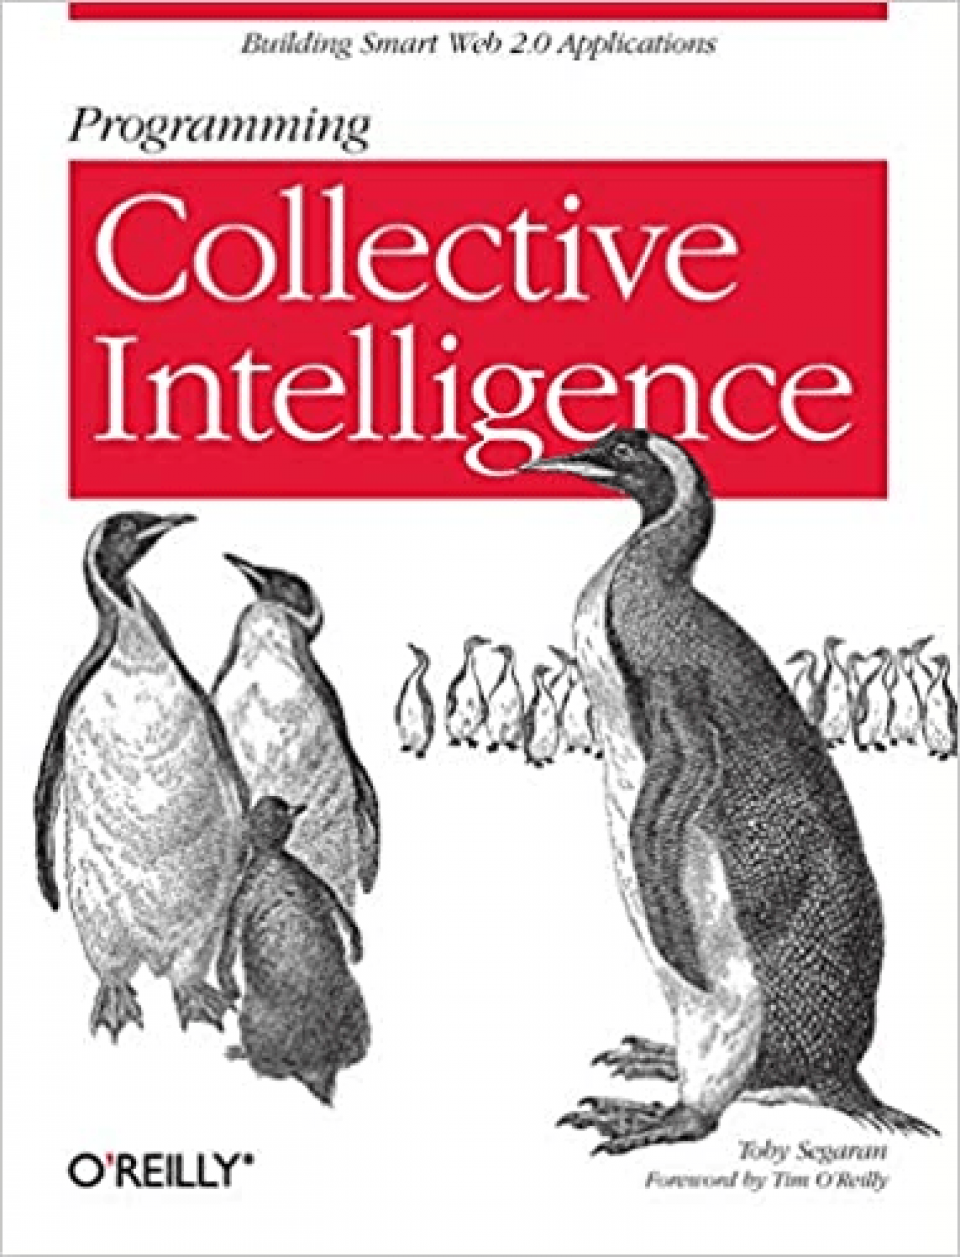 Image of Programming Collective Intelligence Book